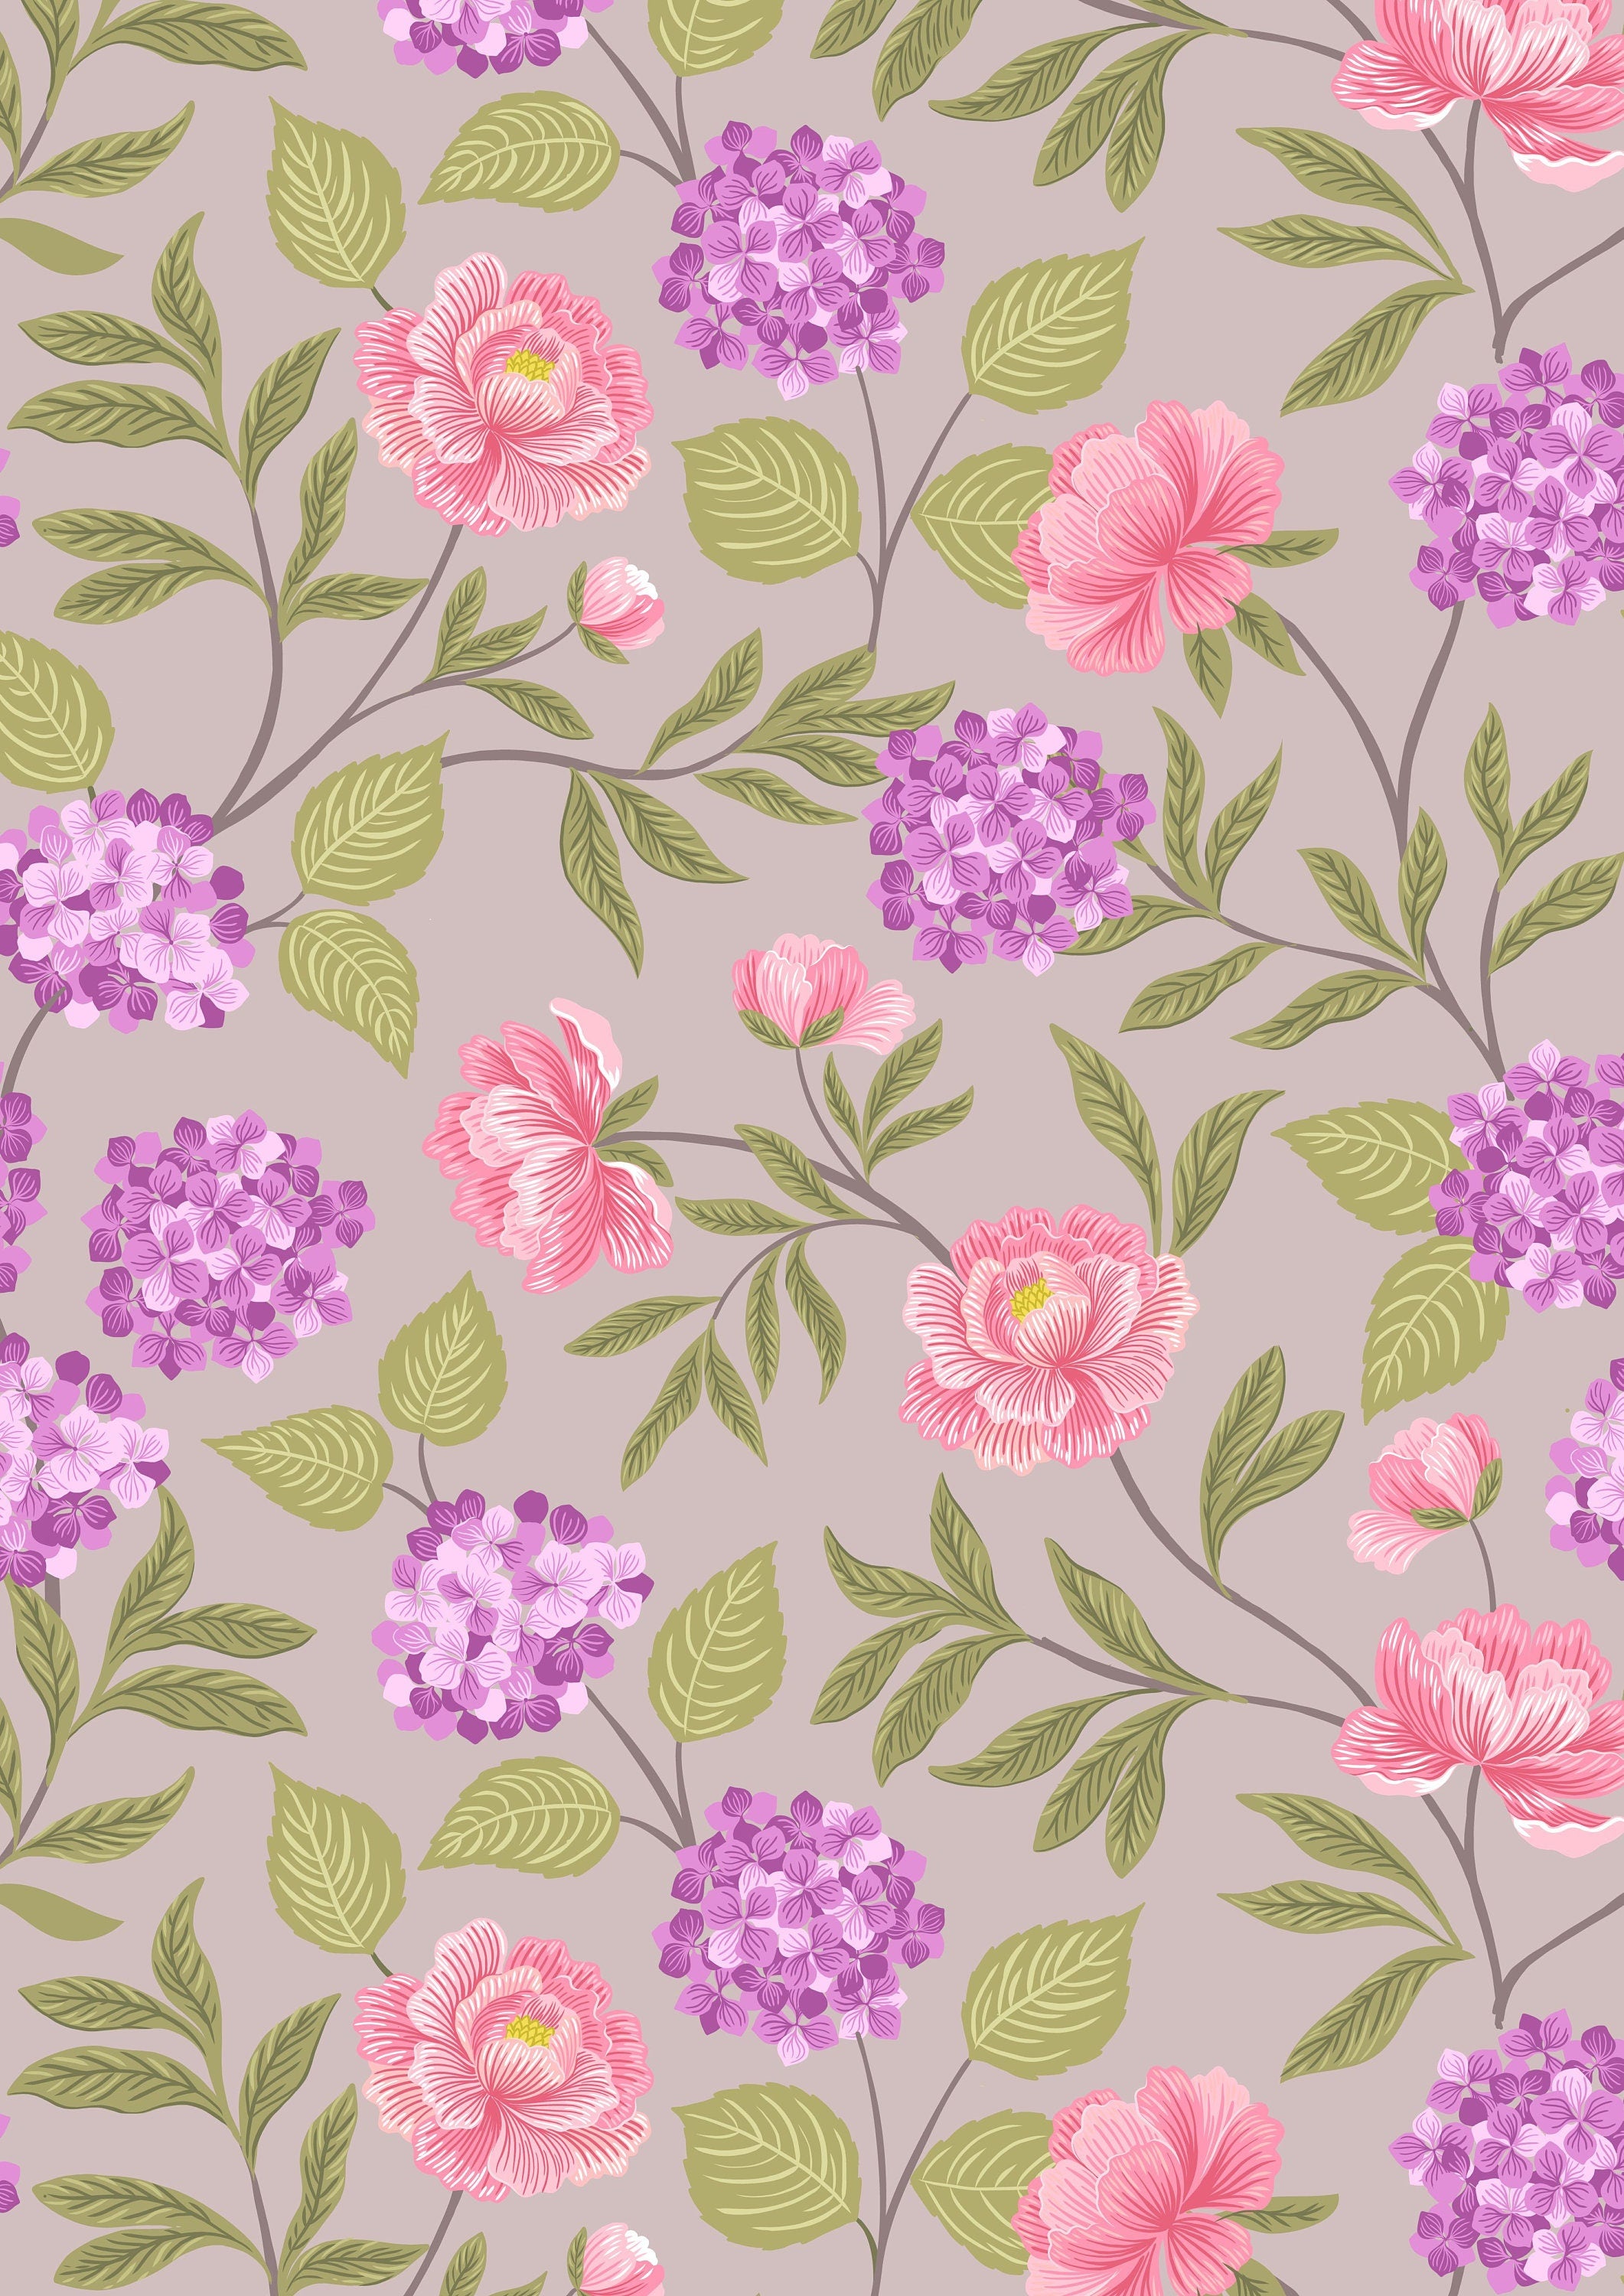 Dahlia's hearts on pale pink cotton fabric - Love Blooms by Lewis & Irene